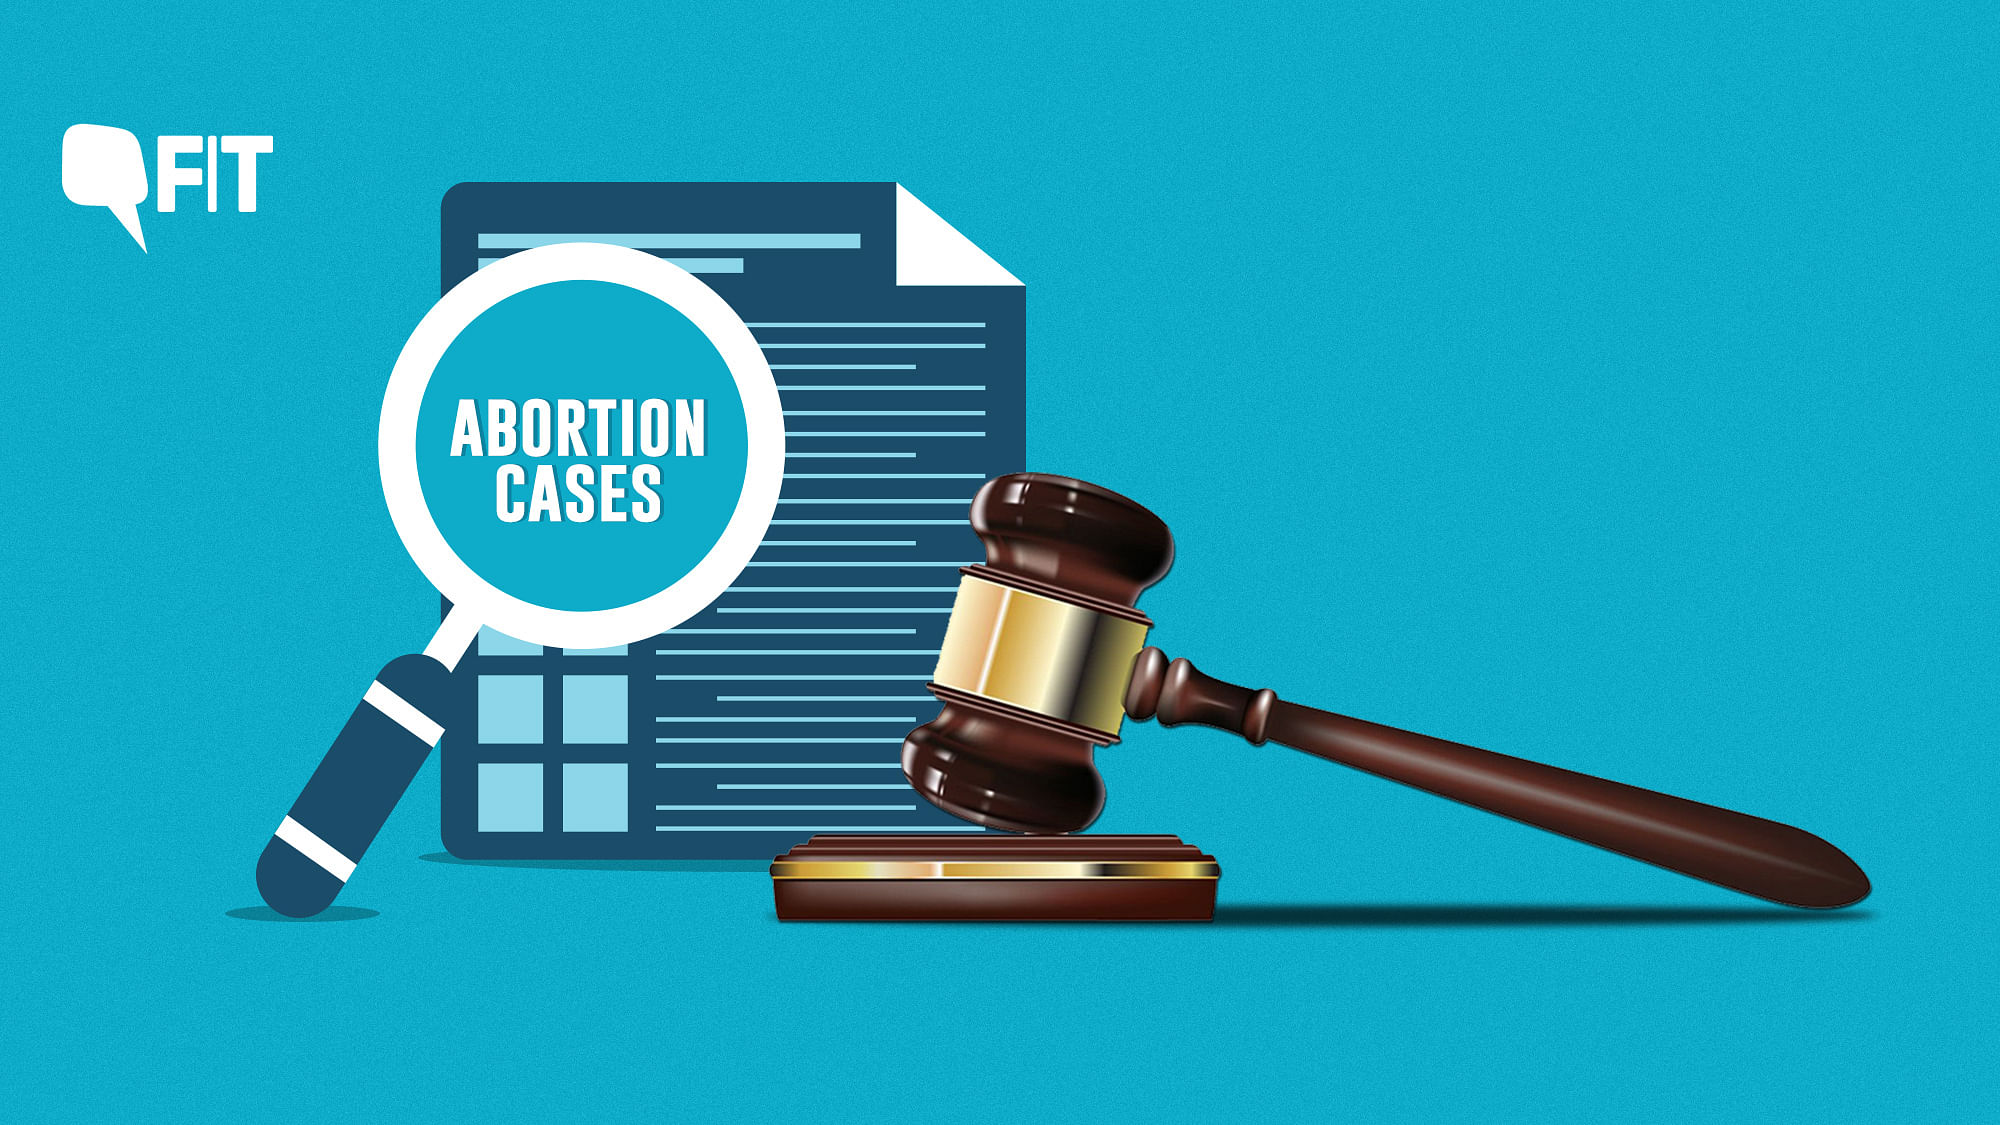 A recent study assesses court judgements in abortion cases filed in India over three years.